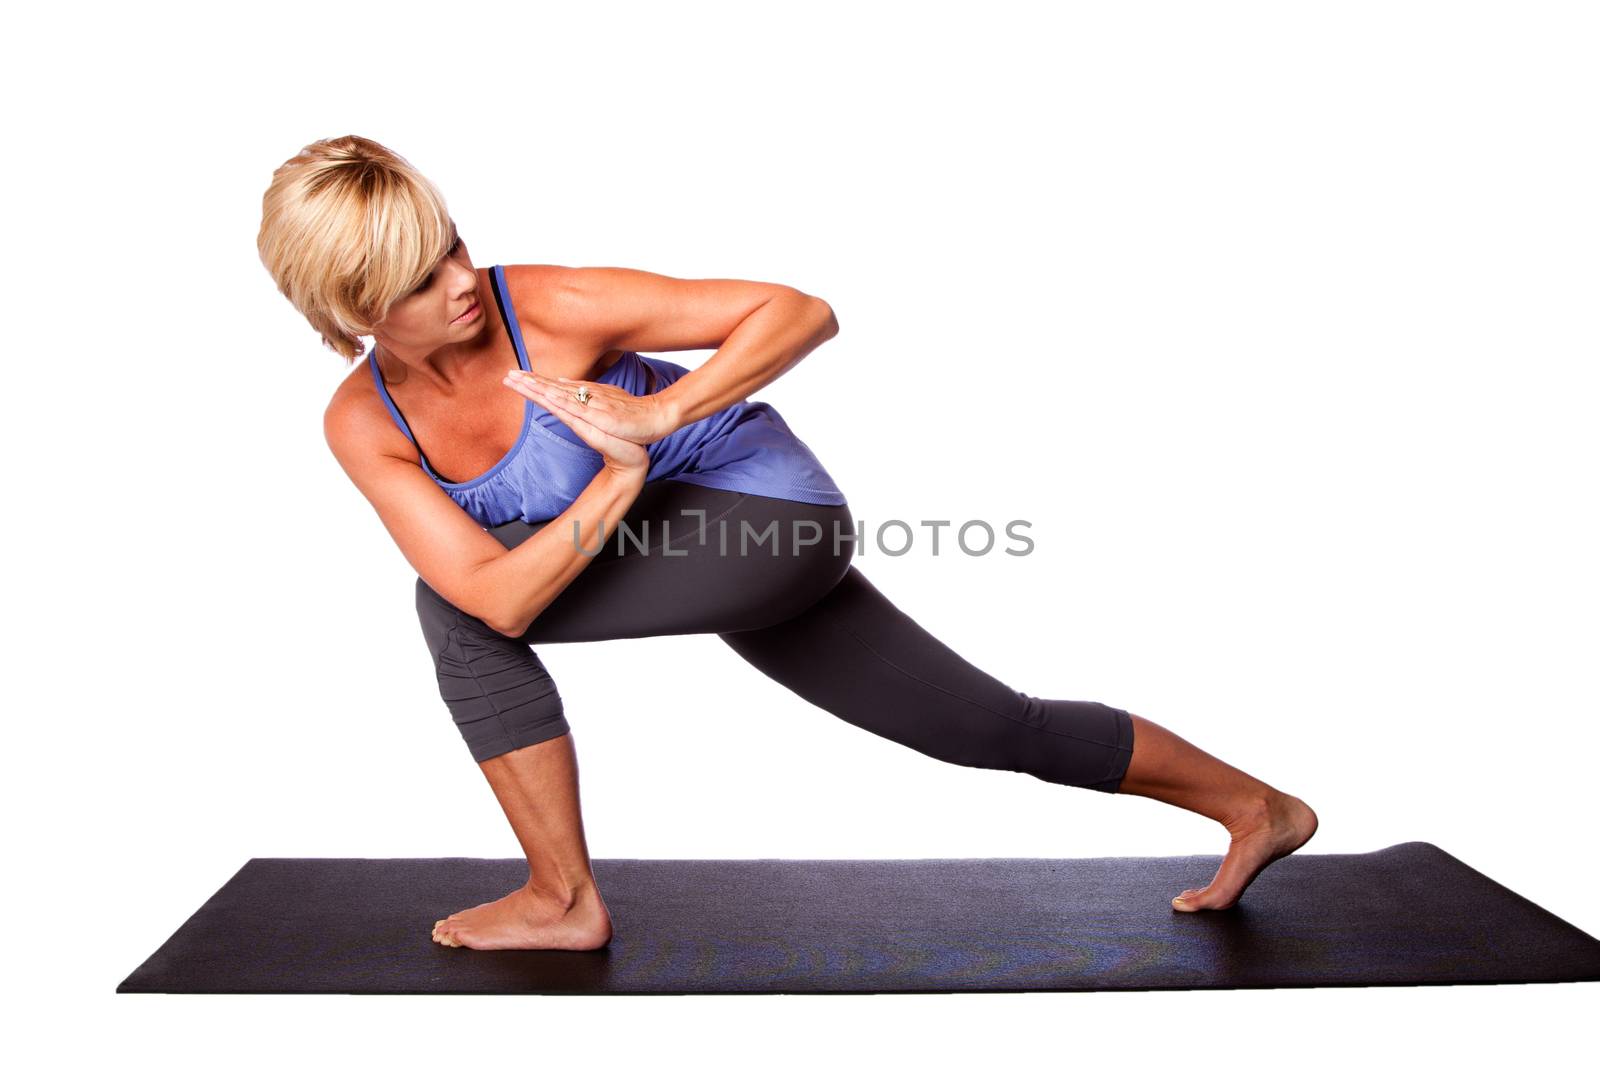 Woman doing Revolved Crescent pose during relaxing meditation Yoga exercise for mental health stretch, isolated.